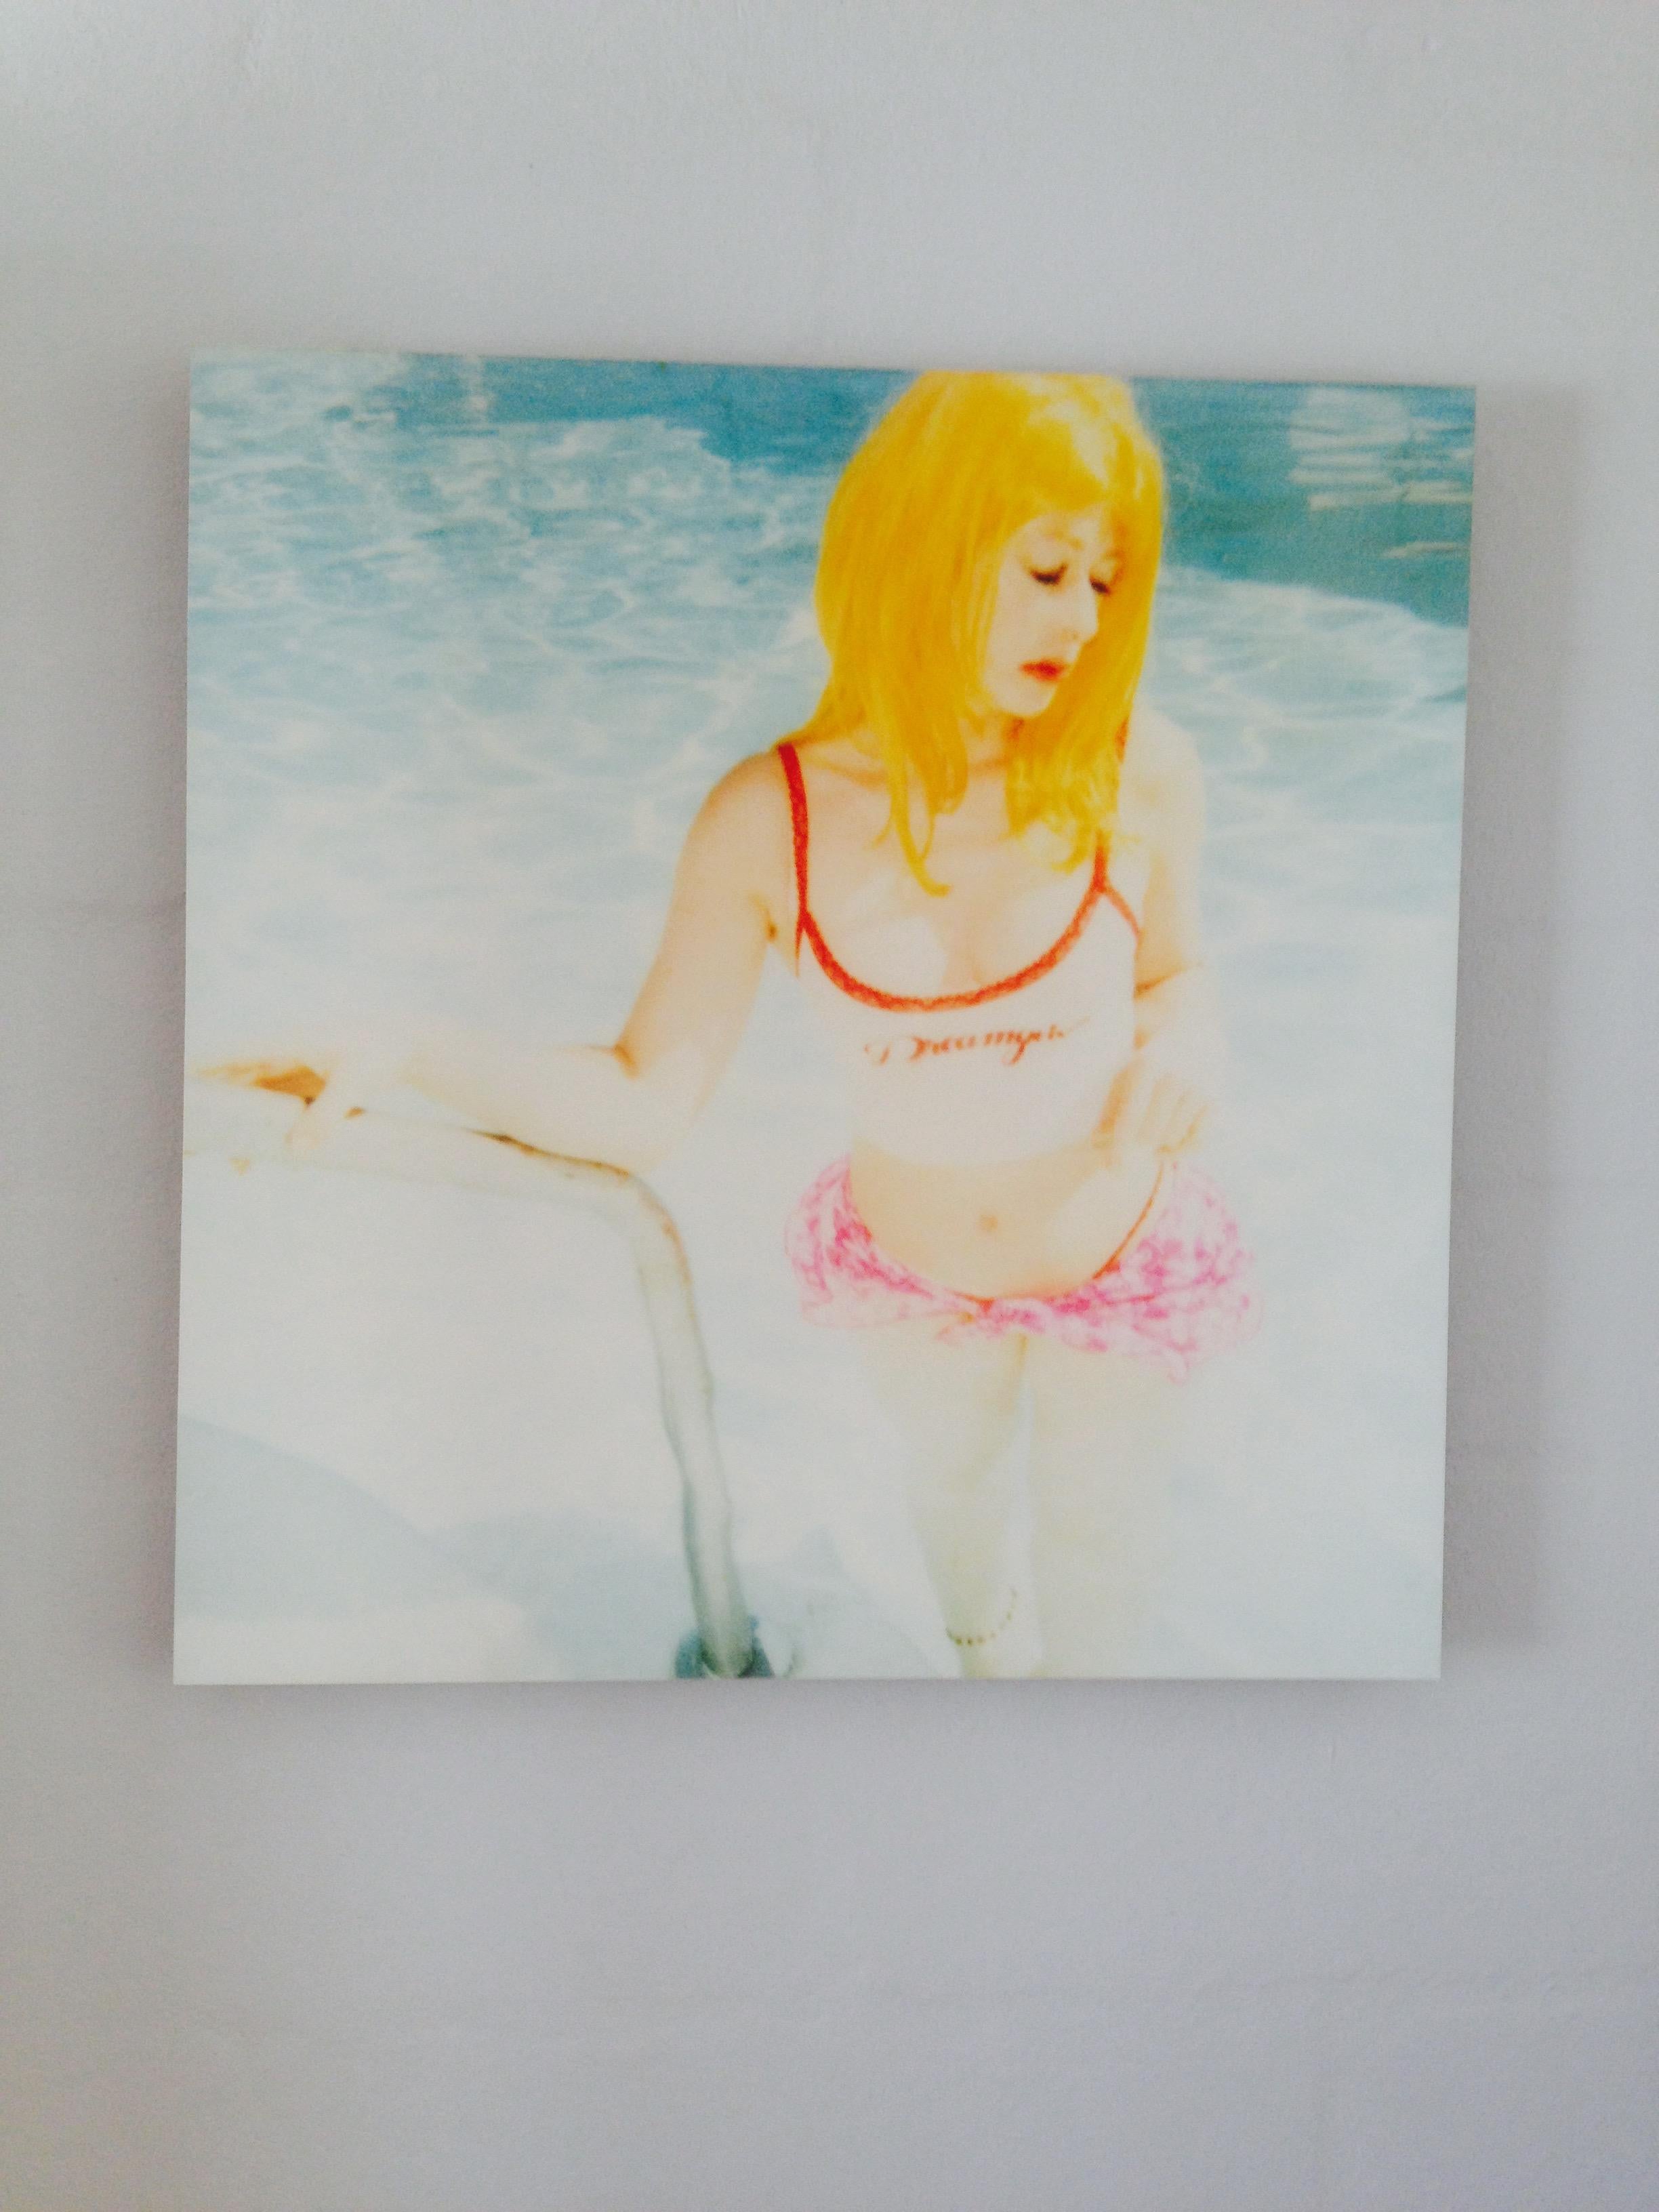 Max in Pool - Contemporary, Landscape, Figurative, expired, Polaroid, analog - Photograph by Stefanie Schneider